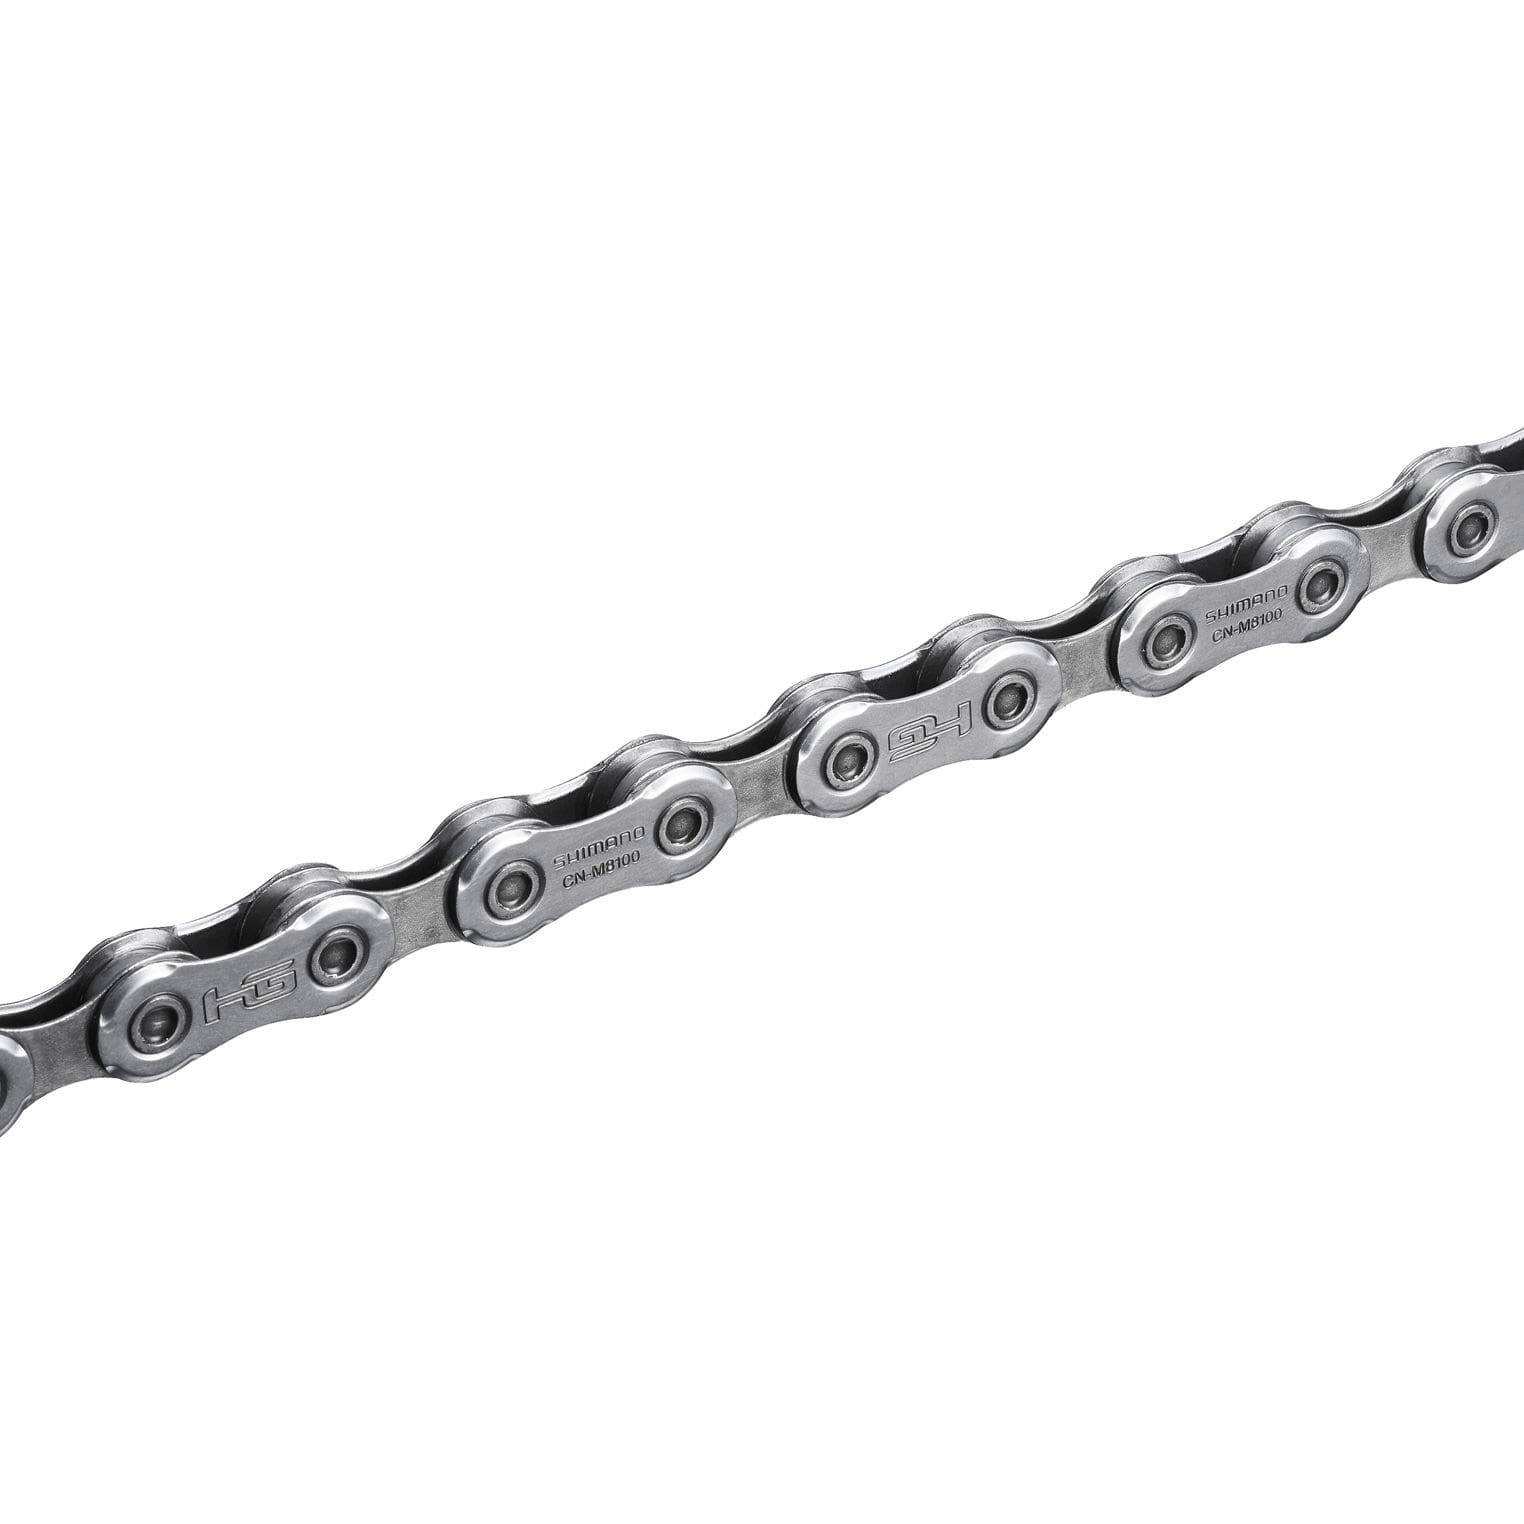 Shimano Chain CN-M8100 12-speed (XT / E-Bike) with Quick-Link